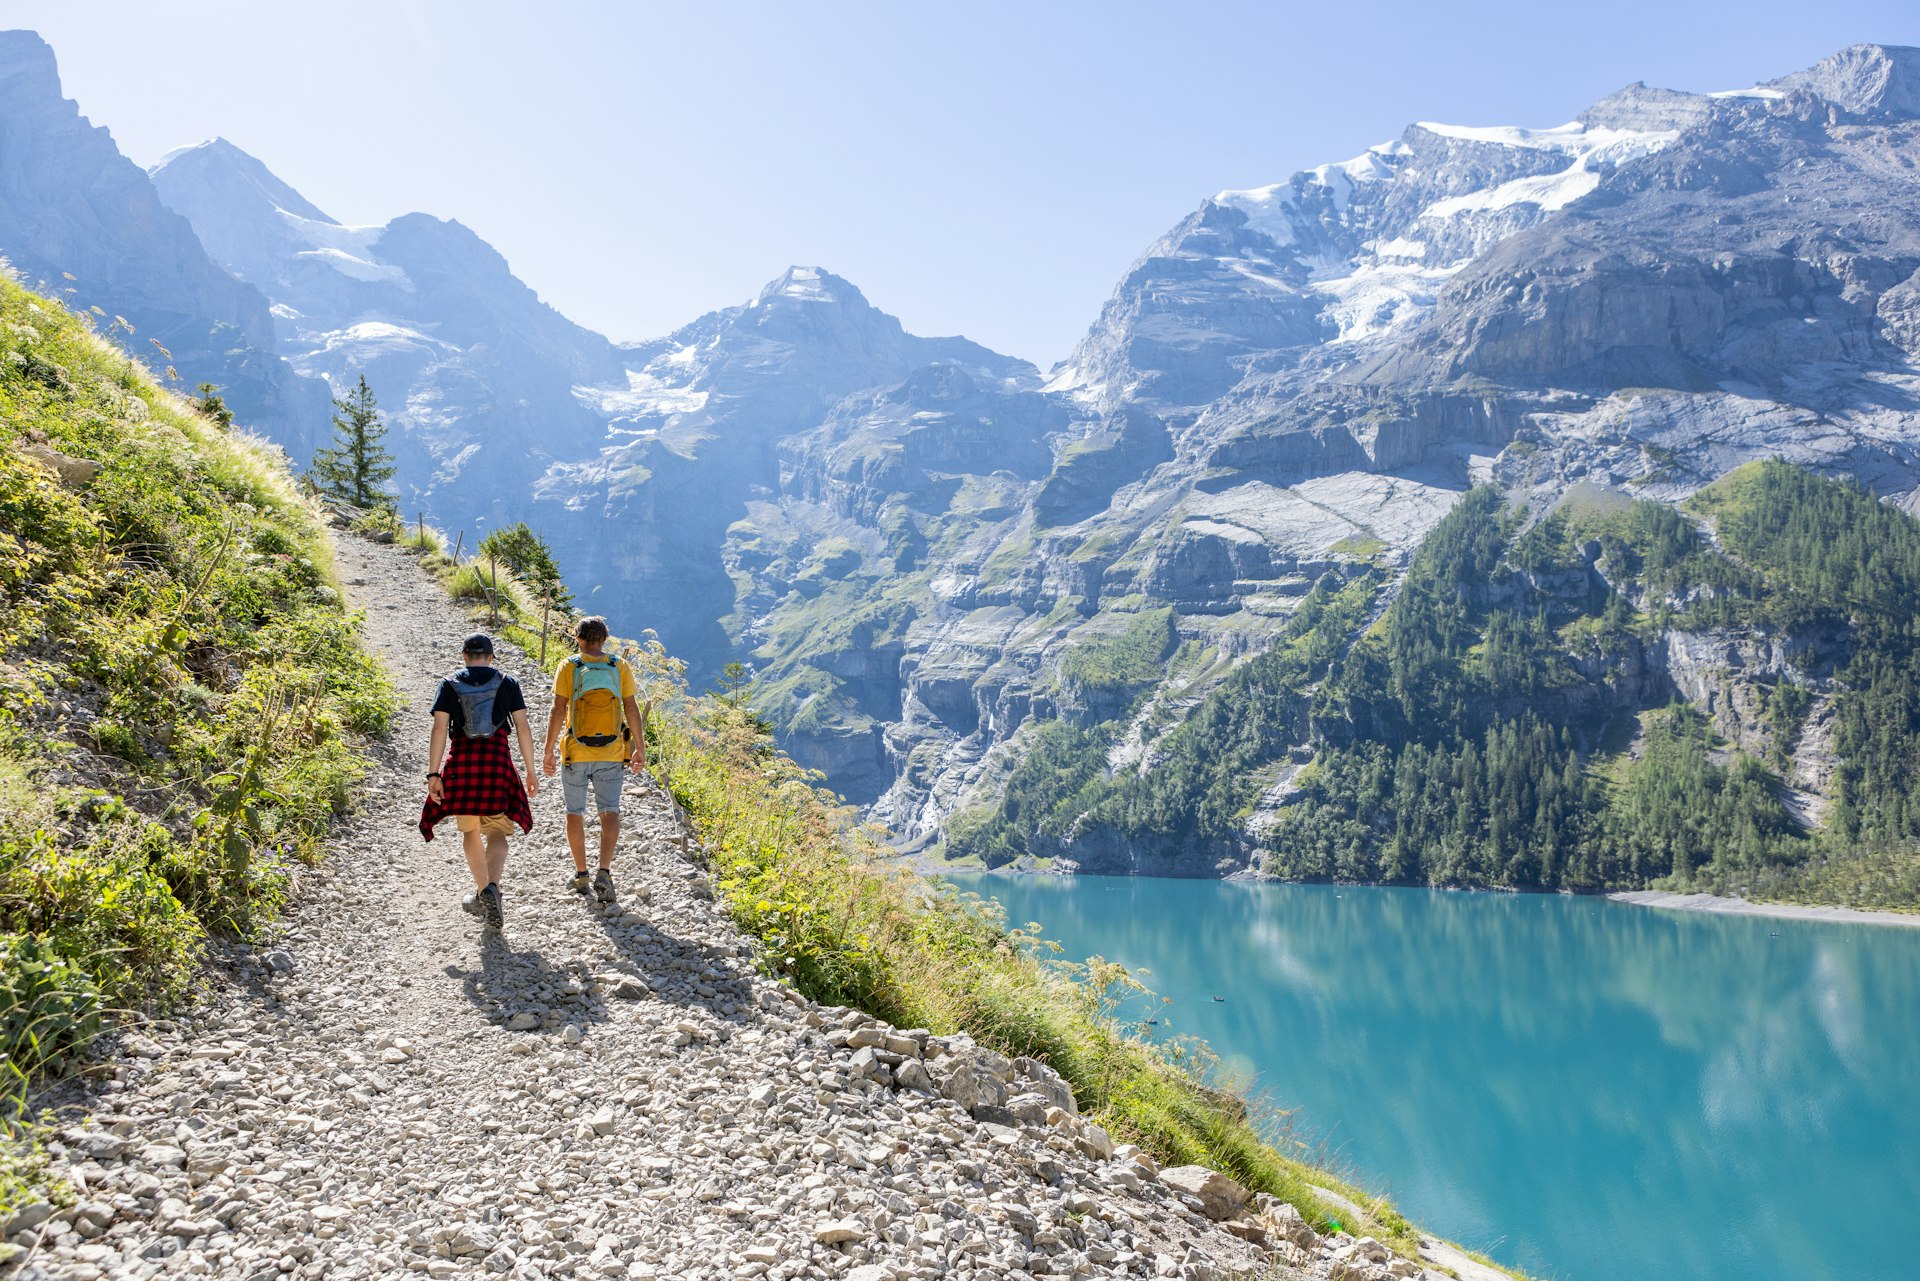 Two men hiking in a beautiful alpine scenery in Summer walking in the Swiss Alps enjoying nature and the outdoors